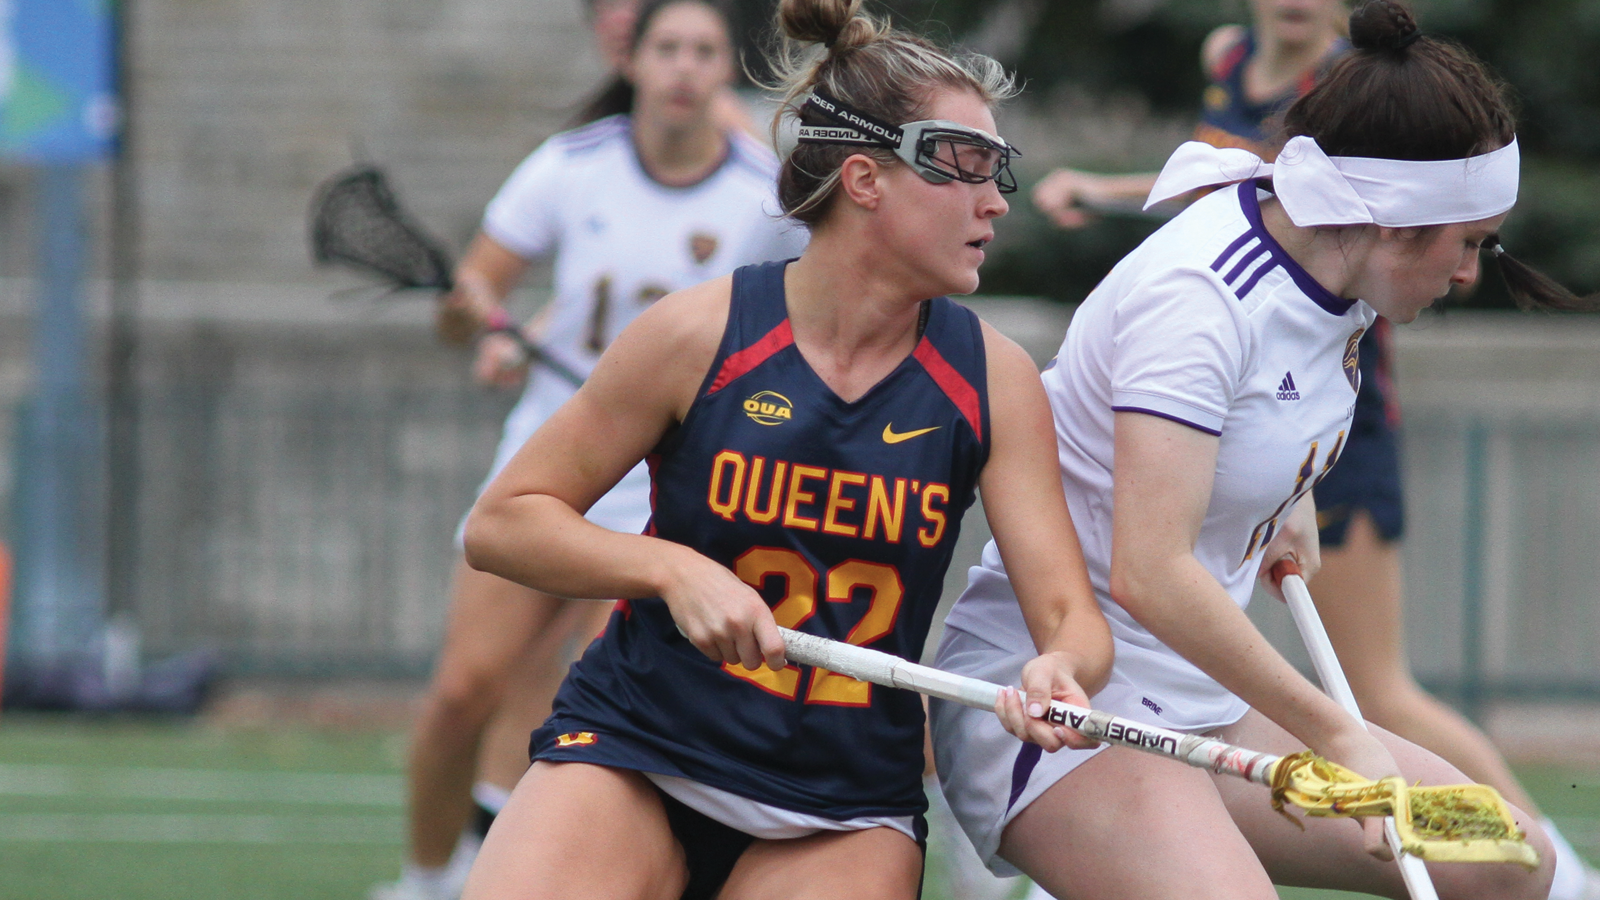 Queen's women's lacrosse player Abby Lee competing for the ball with an opposing player during a game